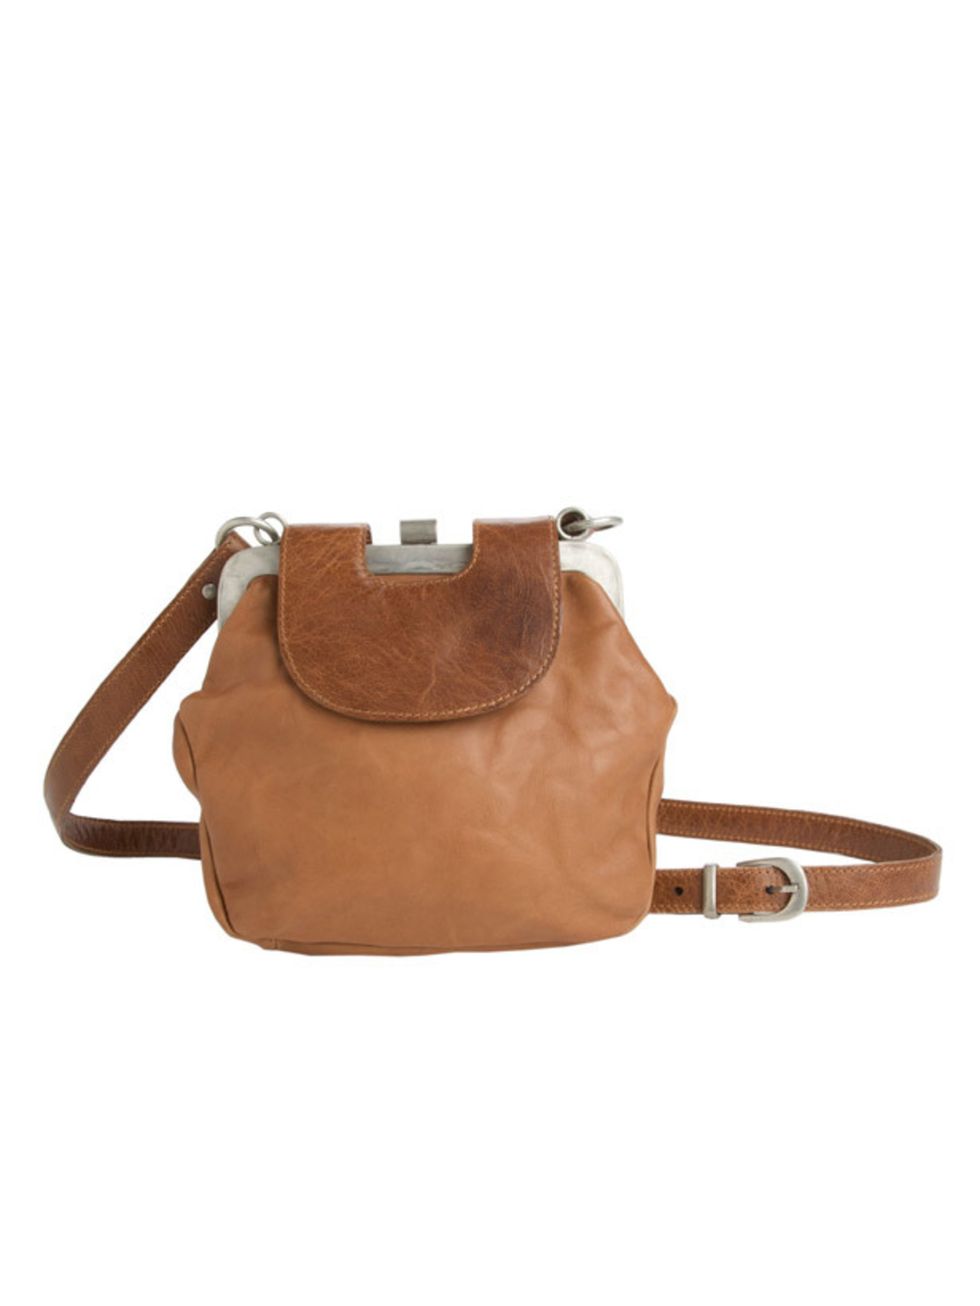 <p>Tan leather bag, £225, by Ally Capellino at <a href="http://www.liberty.co.uk/pws/CatalogueSearch.ice?layout=searchresults.layout&amp;performSearch=true&amp;visible=true&amp;productAttributeName=&amp;productAttributeValue=&amp;productsPerPage=9999&amp;